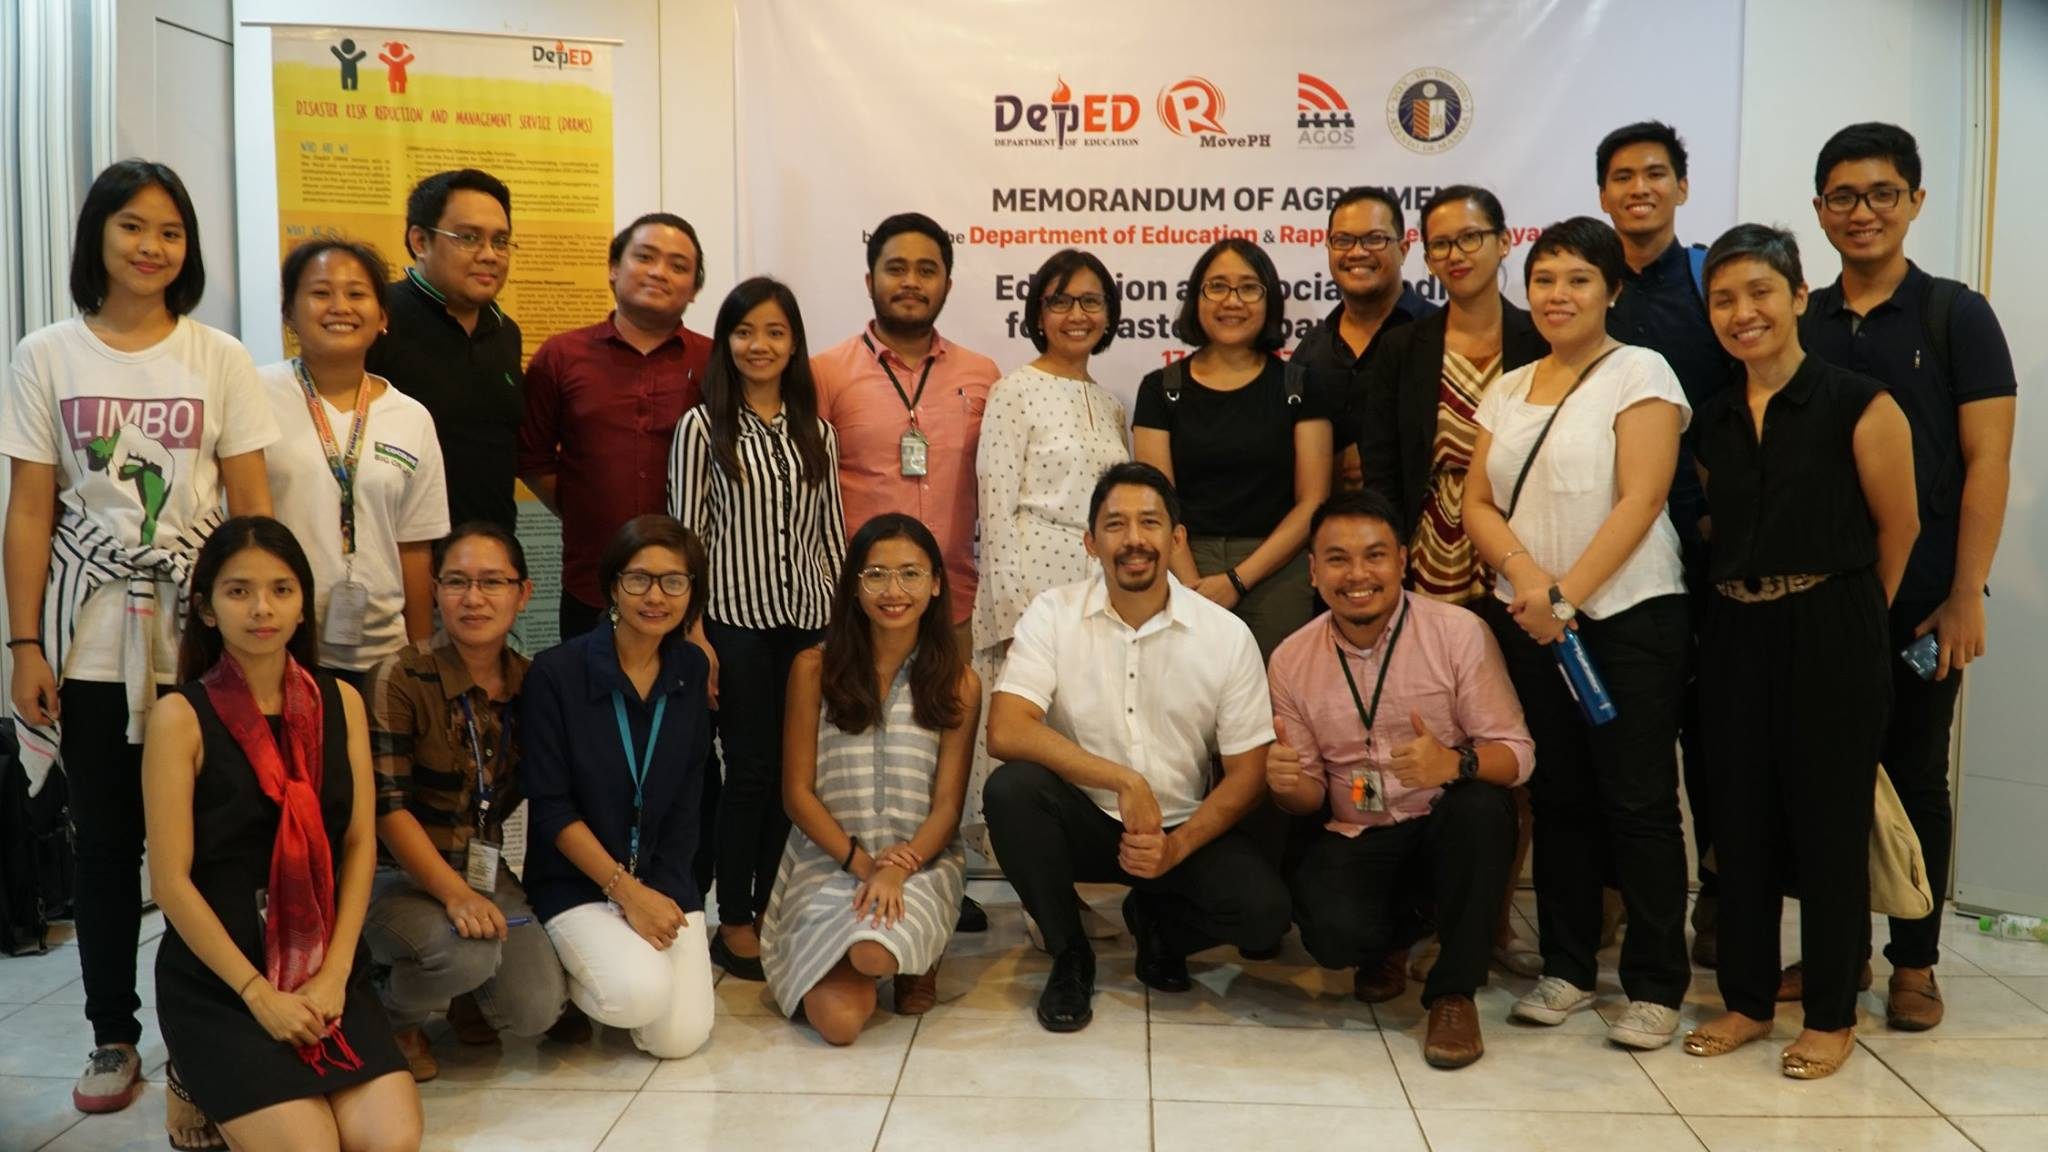 SIGNED. Members of DepEd, MovePH and Ateneo eBayanihan teams. At the center are Dir Ronilda Co, Prof Reena Estuar of Ateneo, and Rupert Ambil of MovePH. Photo by Jaen Manegdeg/Rappler  